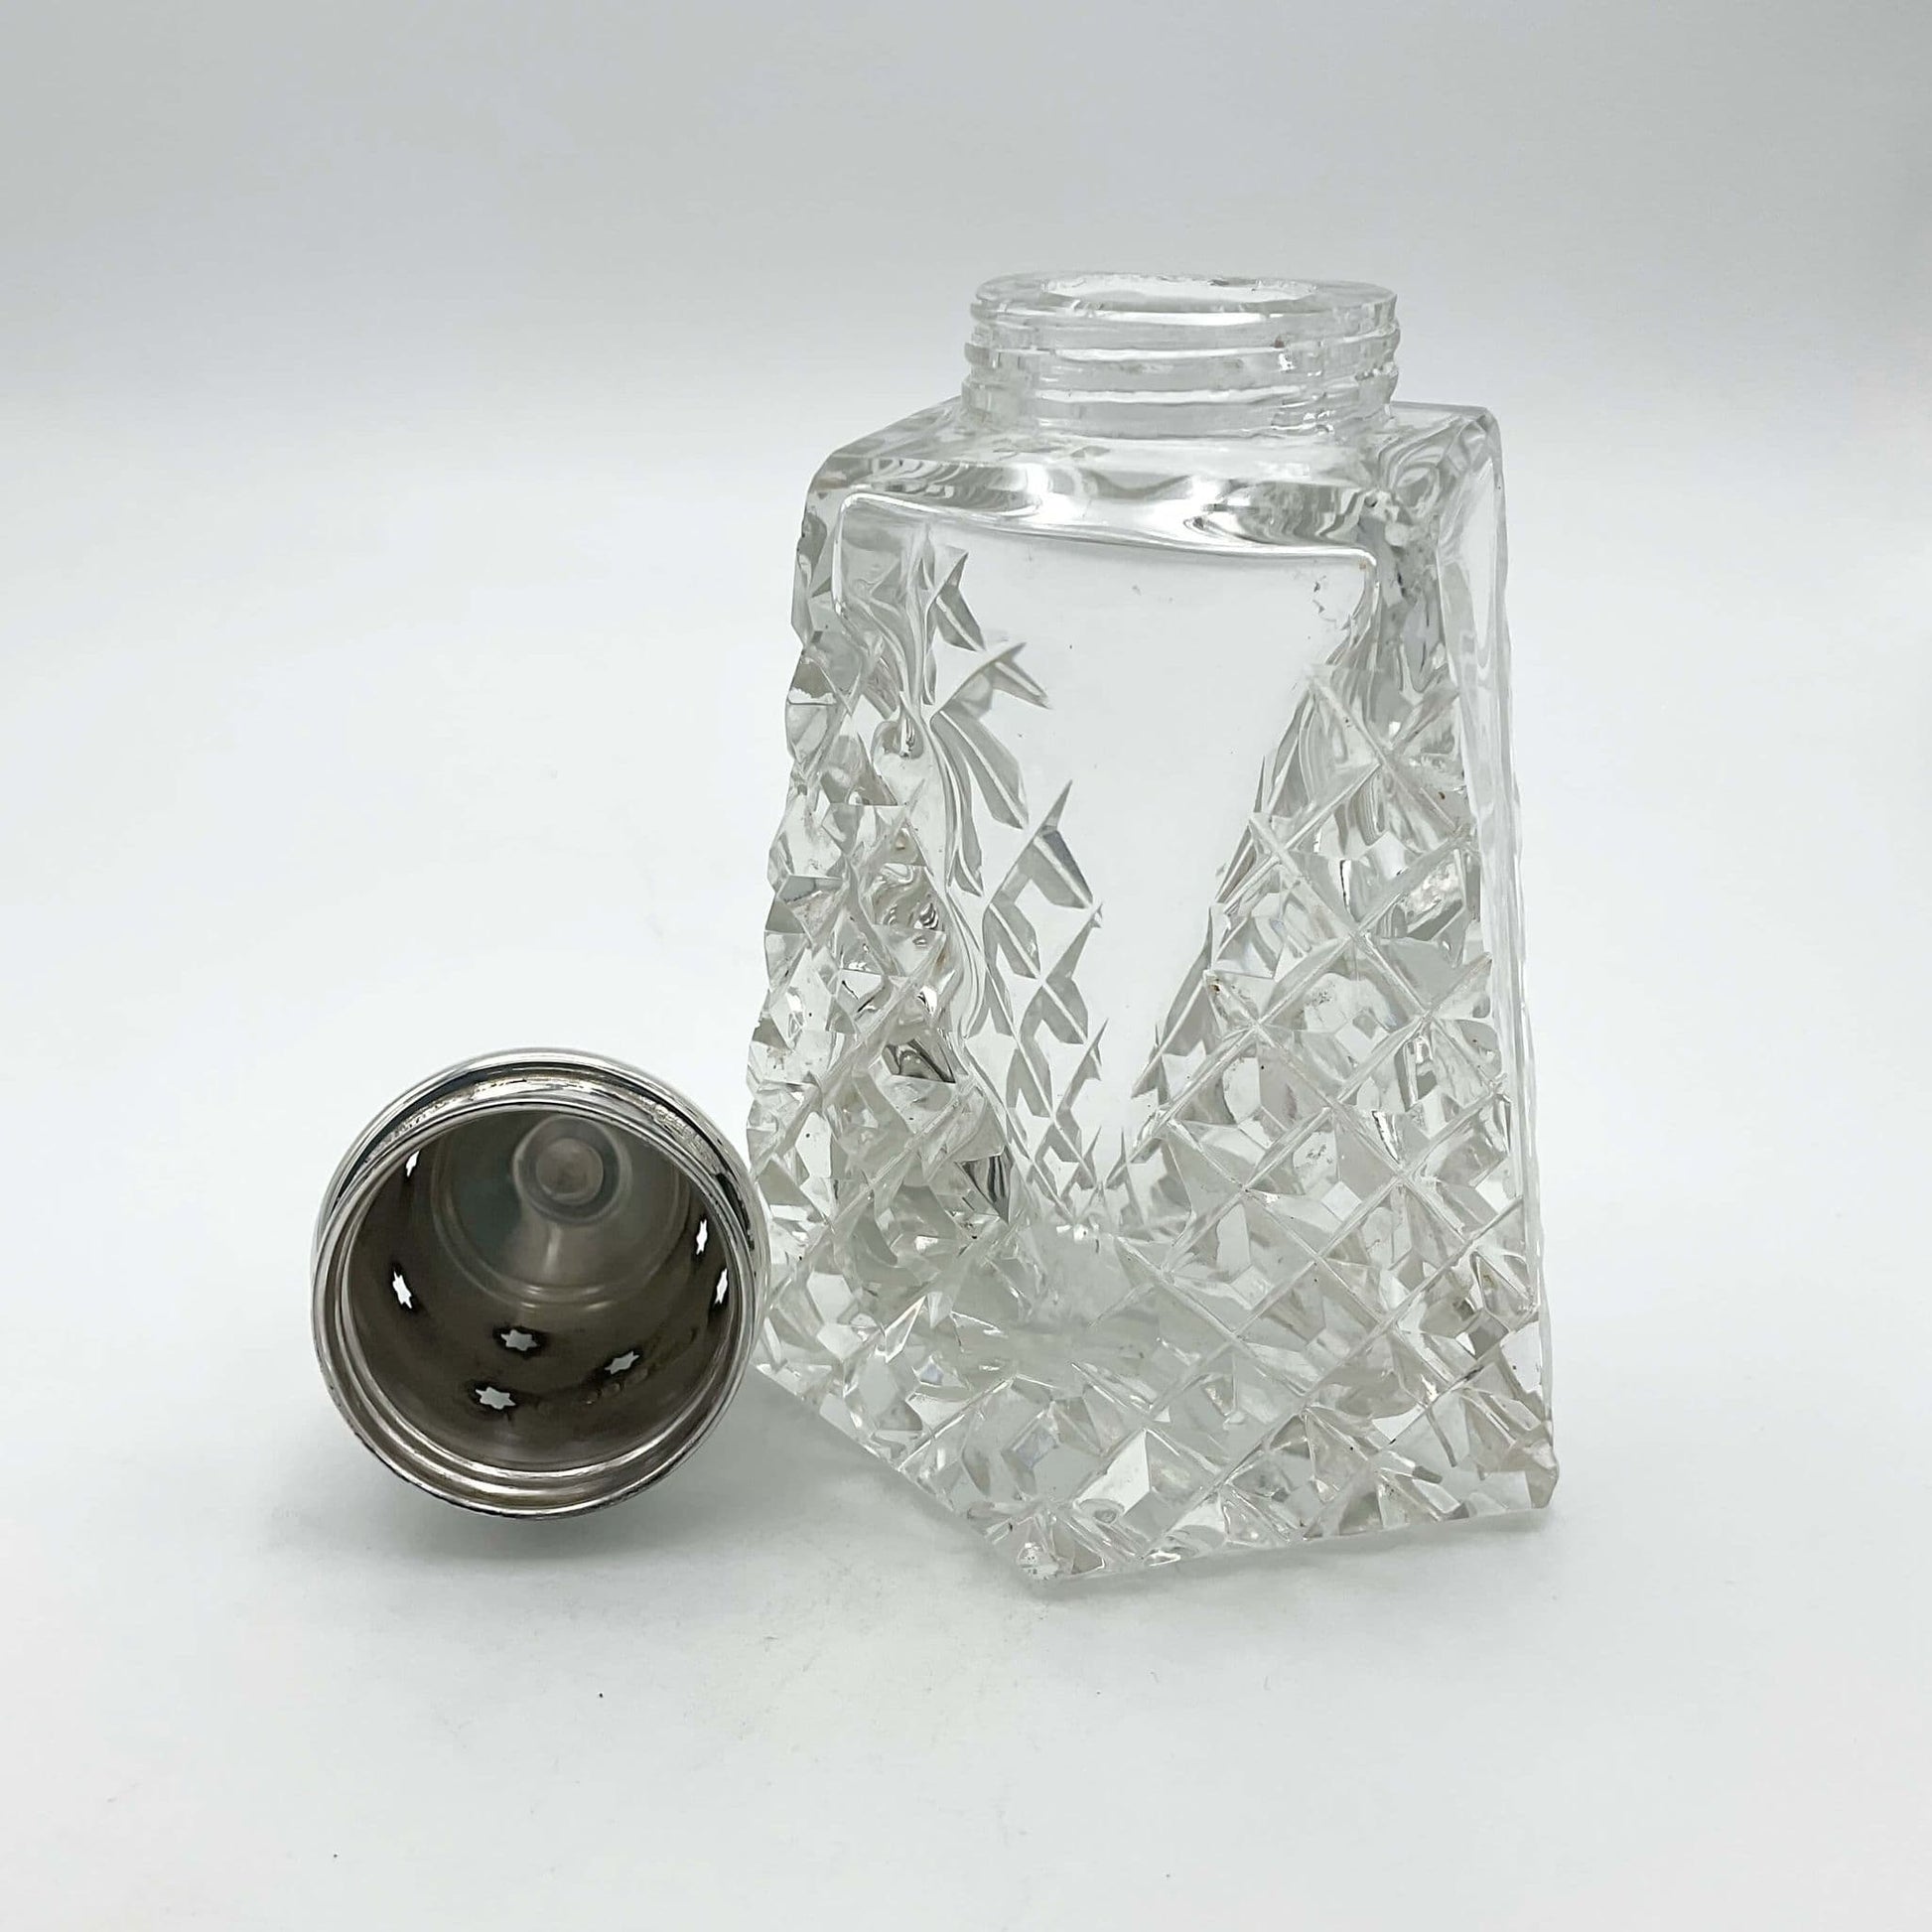 Crystal glass sugar sifter with the silver lid off sitting next to it. of sugar sh